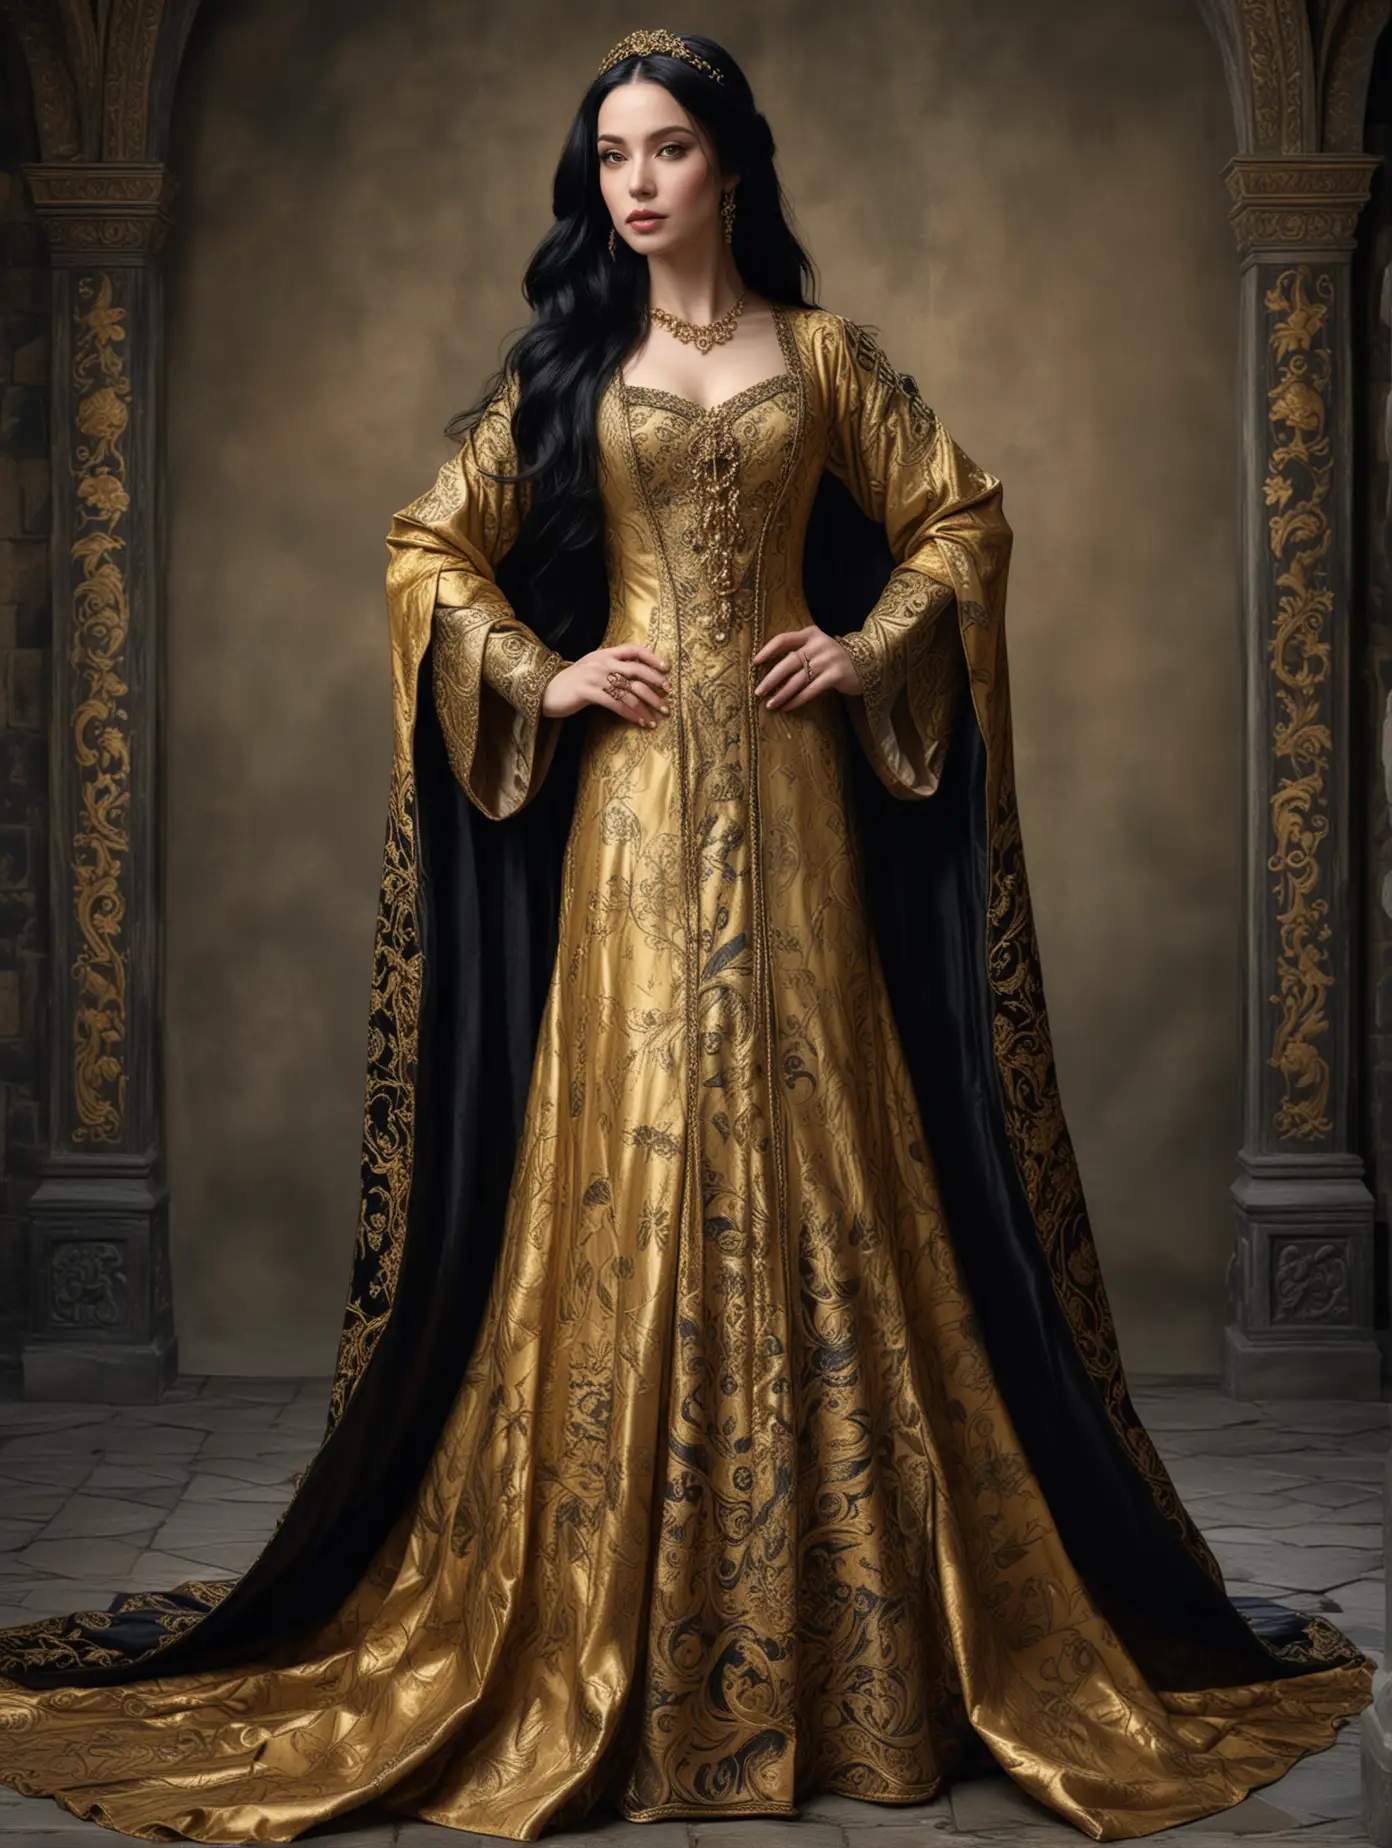 Beautiful Woman in Extravagant Gold Medieval Robe